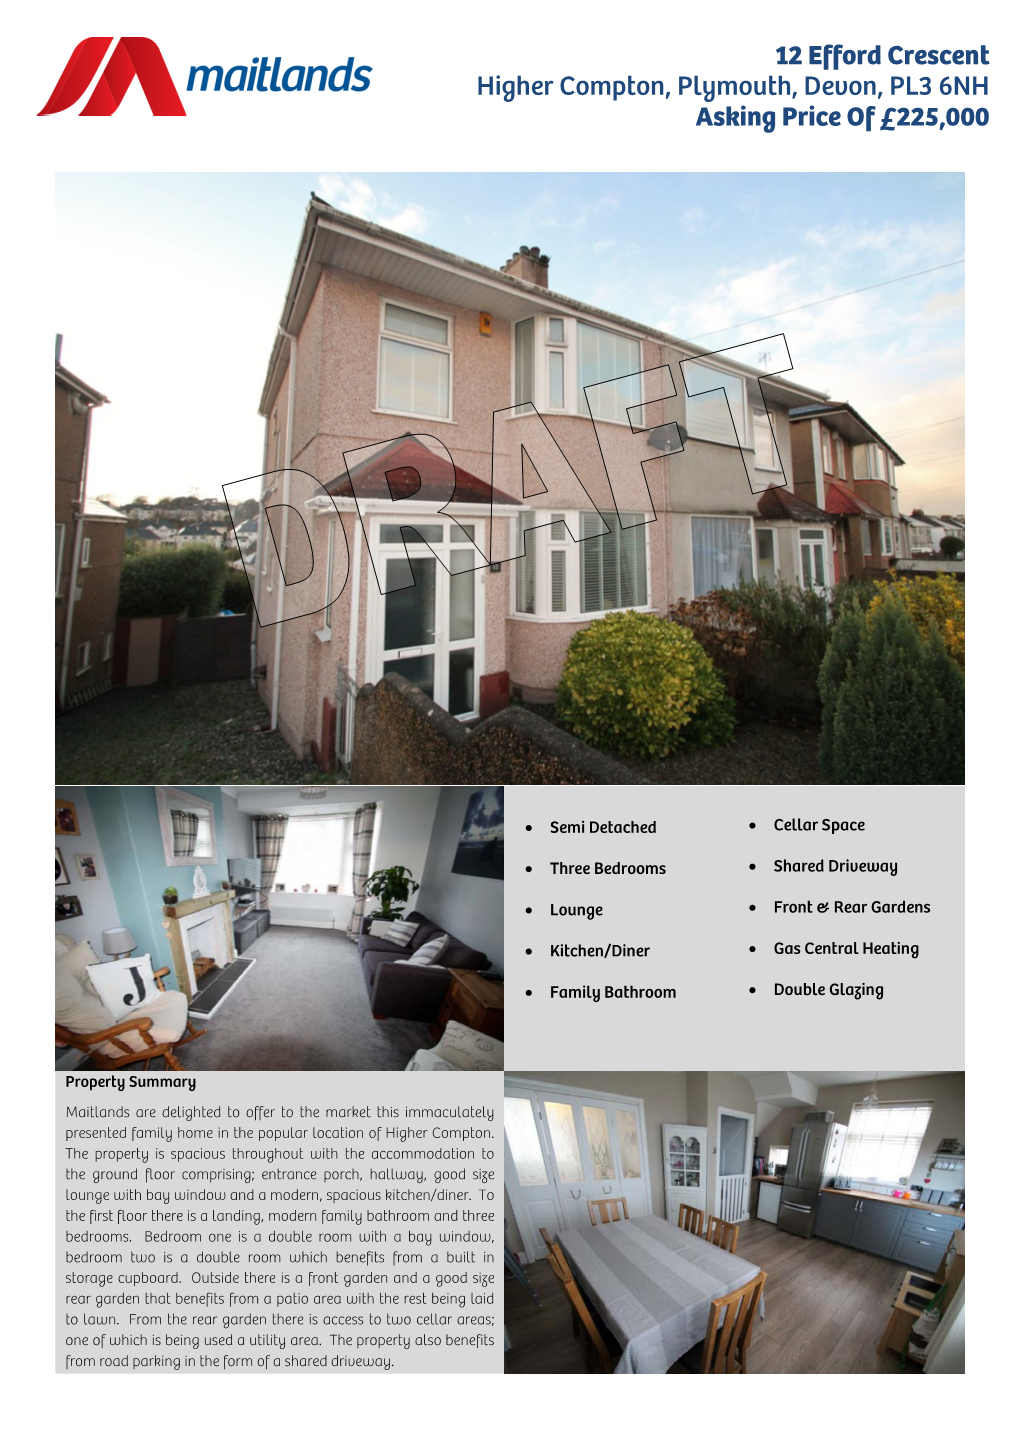 12 Efford Crescent Higher Compton, Plymouth, Devon, PL3 6NH Asking Price of £225,000